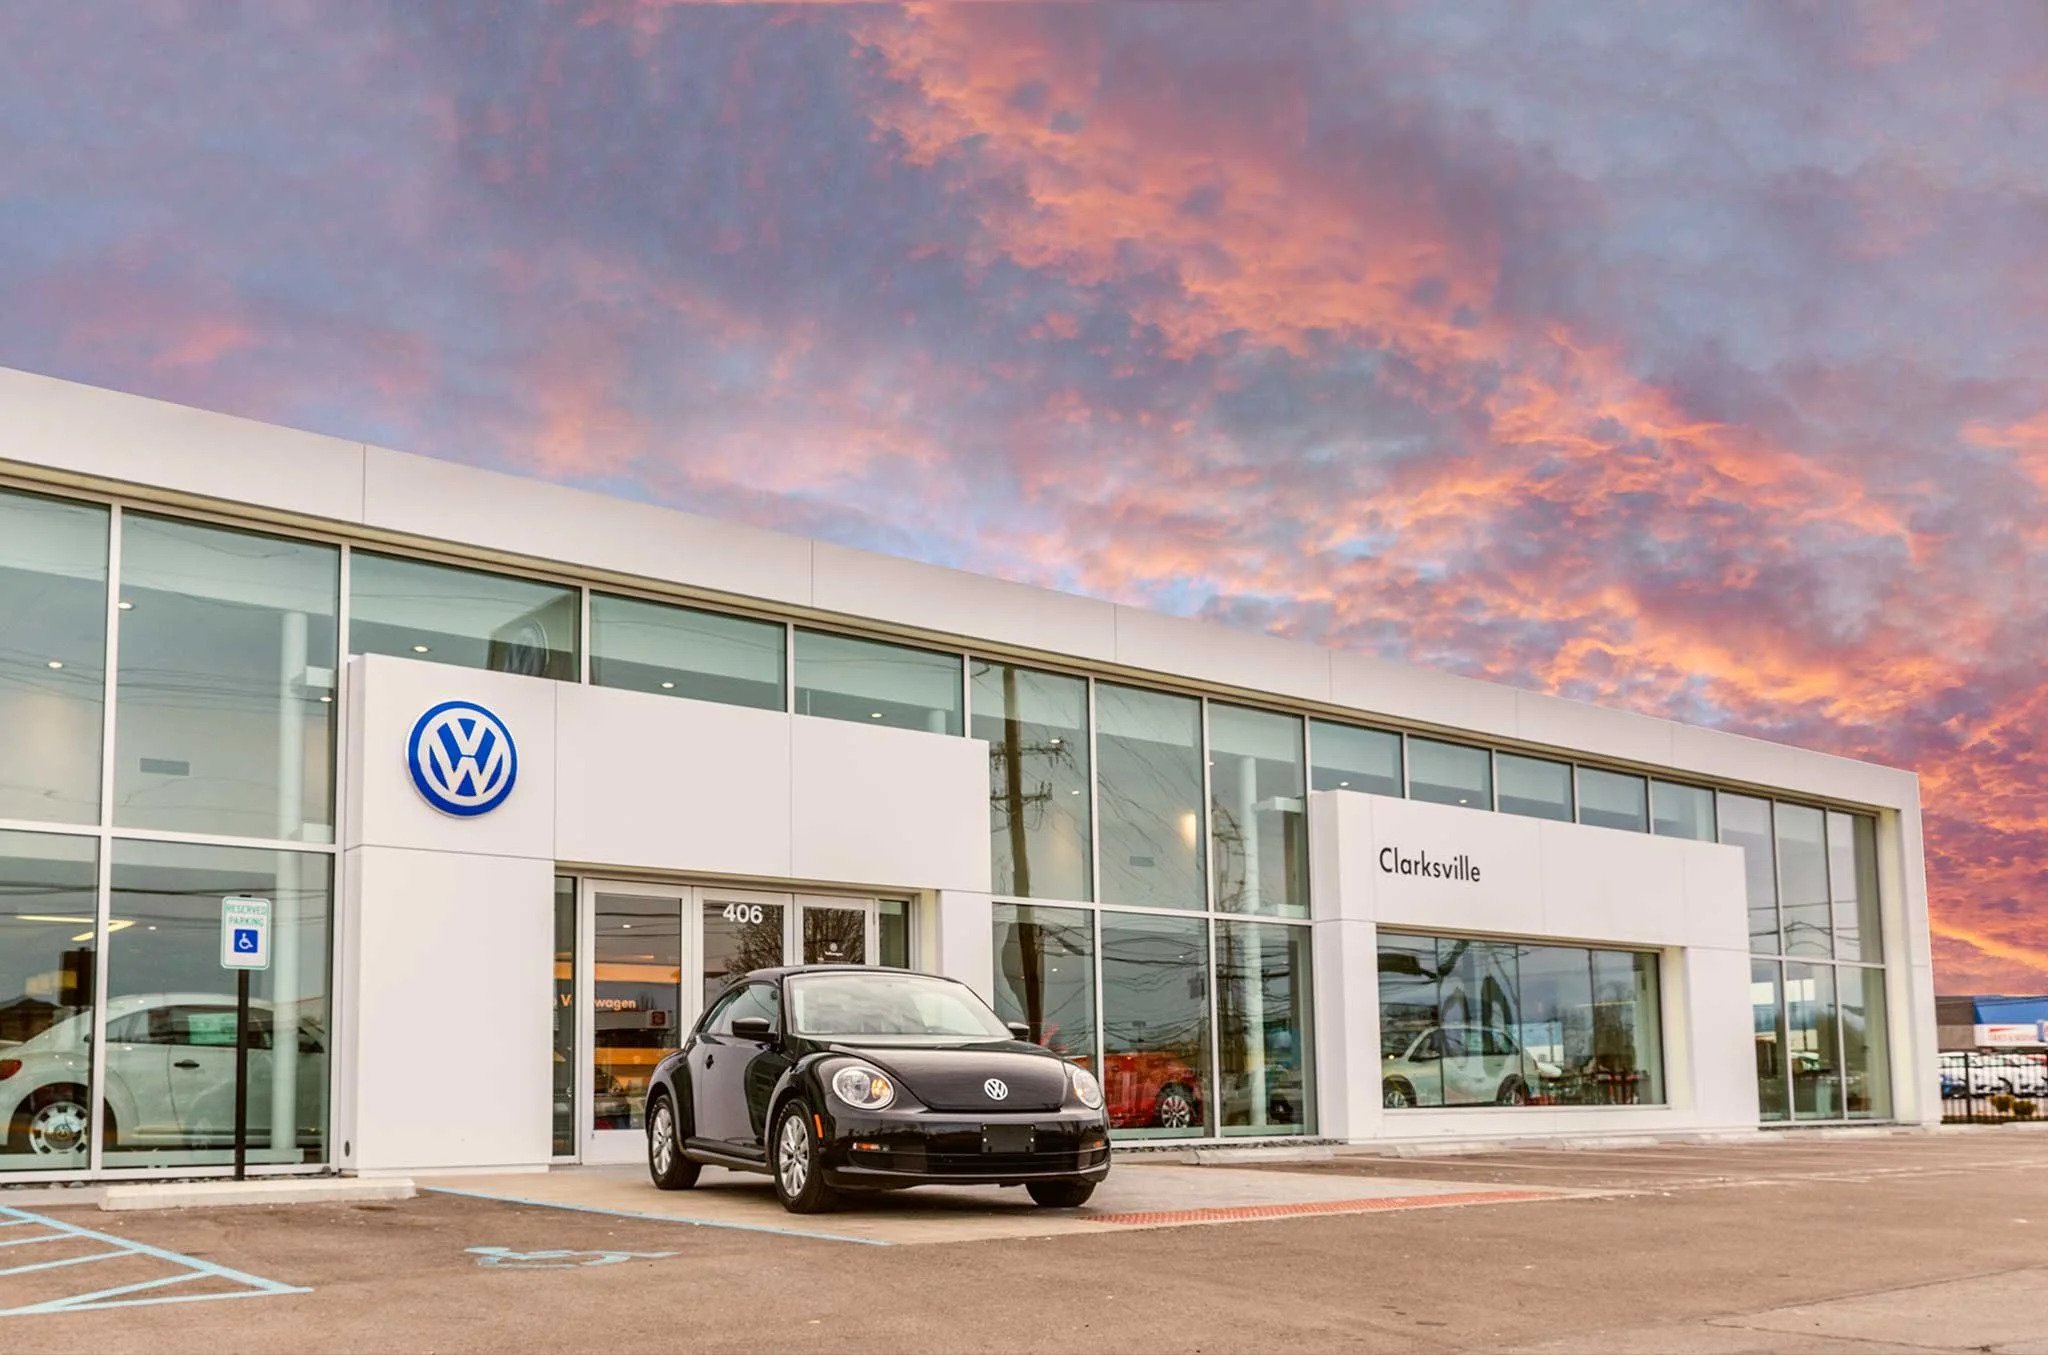 Check out the all-new 2022 Volkswagen ID.4 at your preferred Volkswagen dealer in Clarksville, Indiana